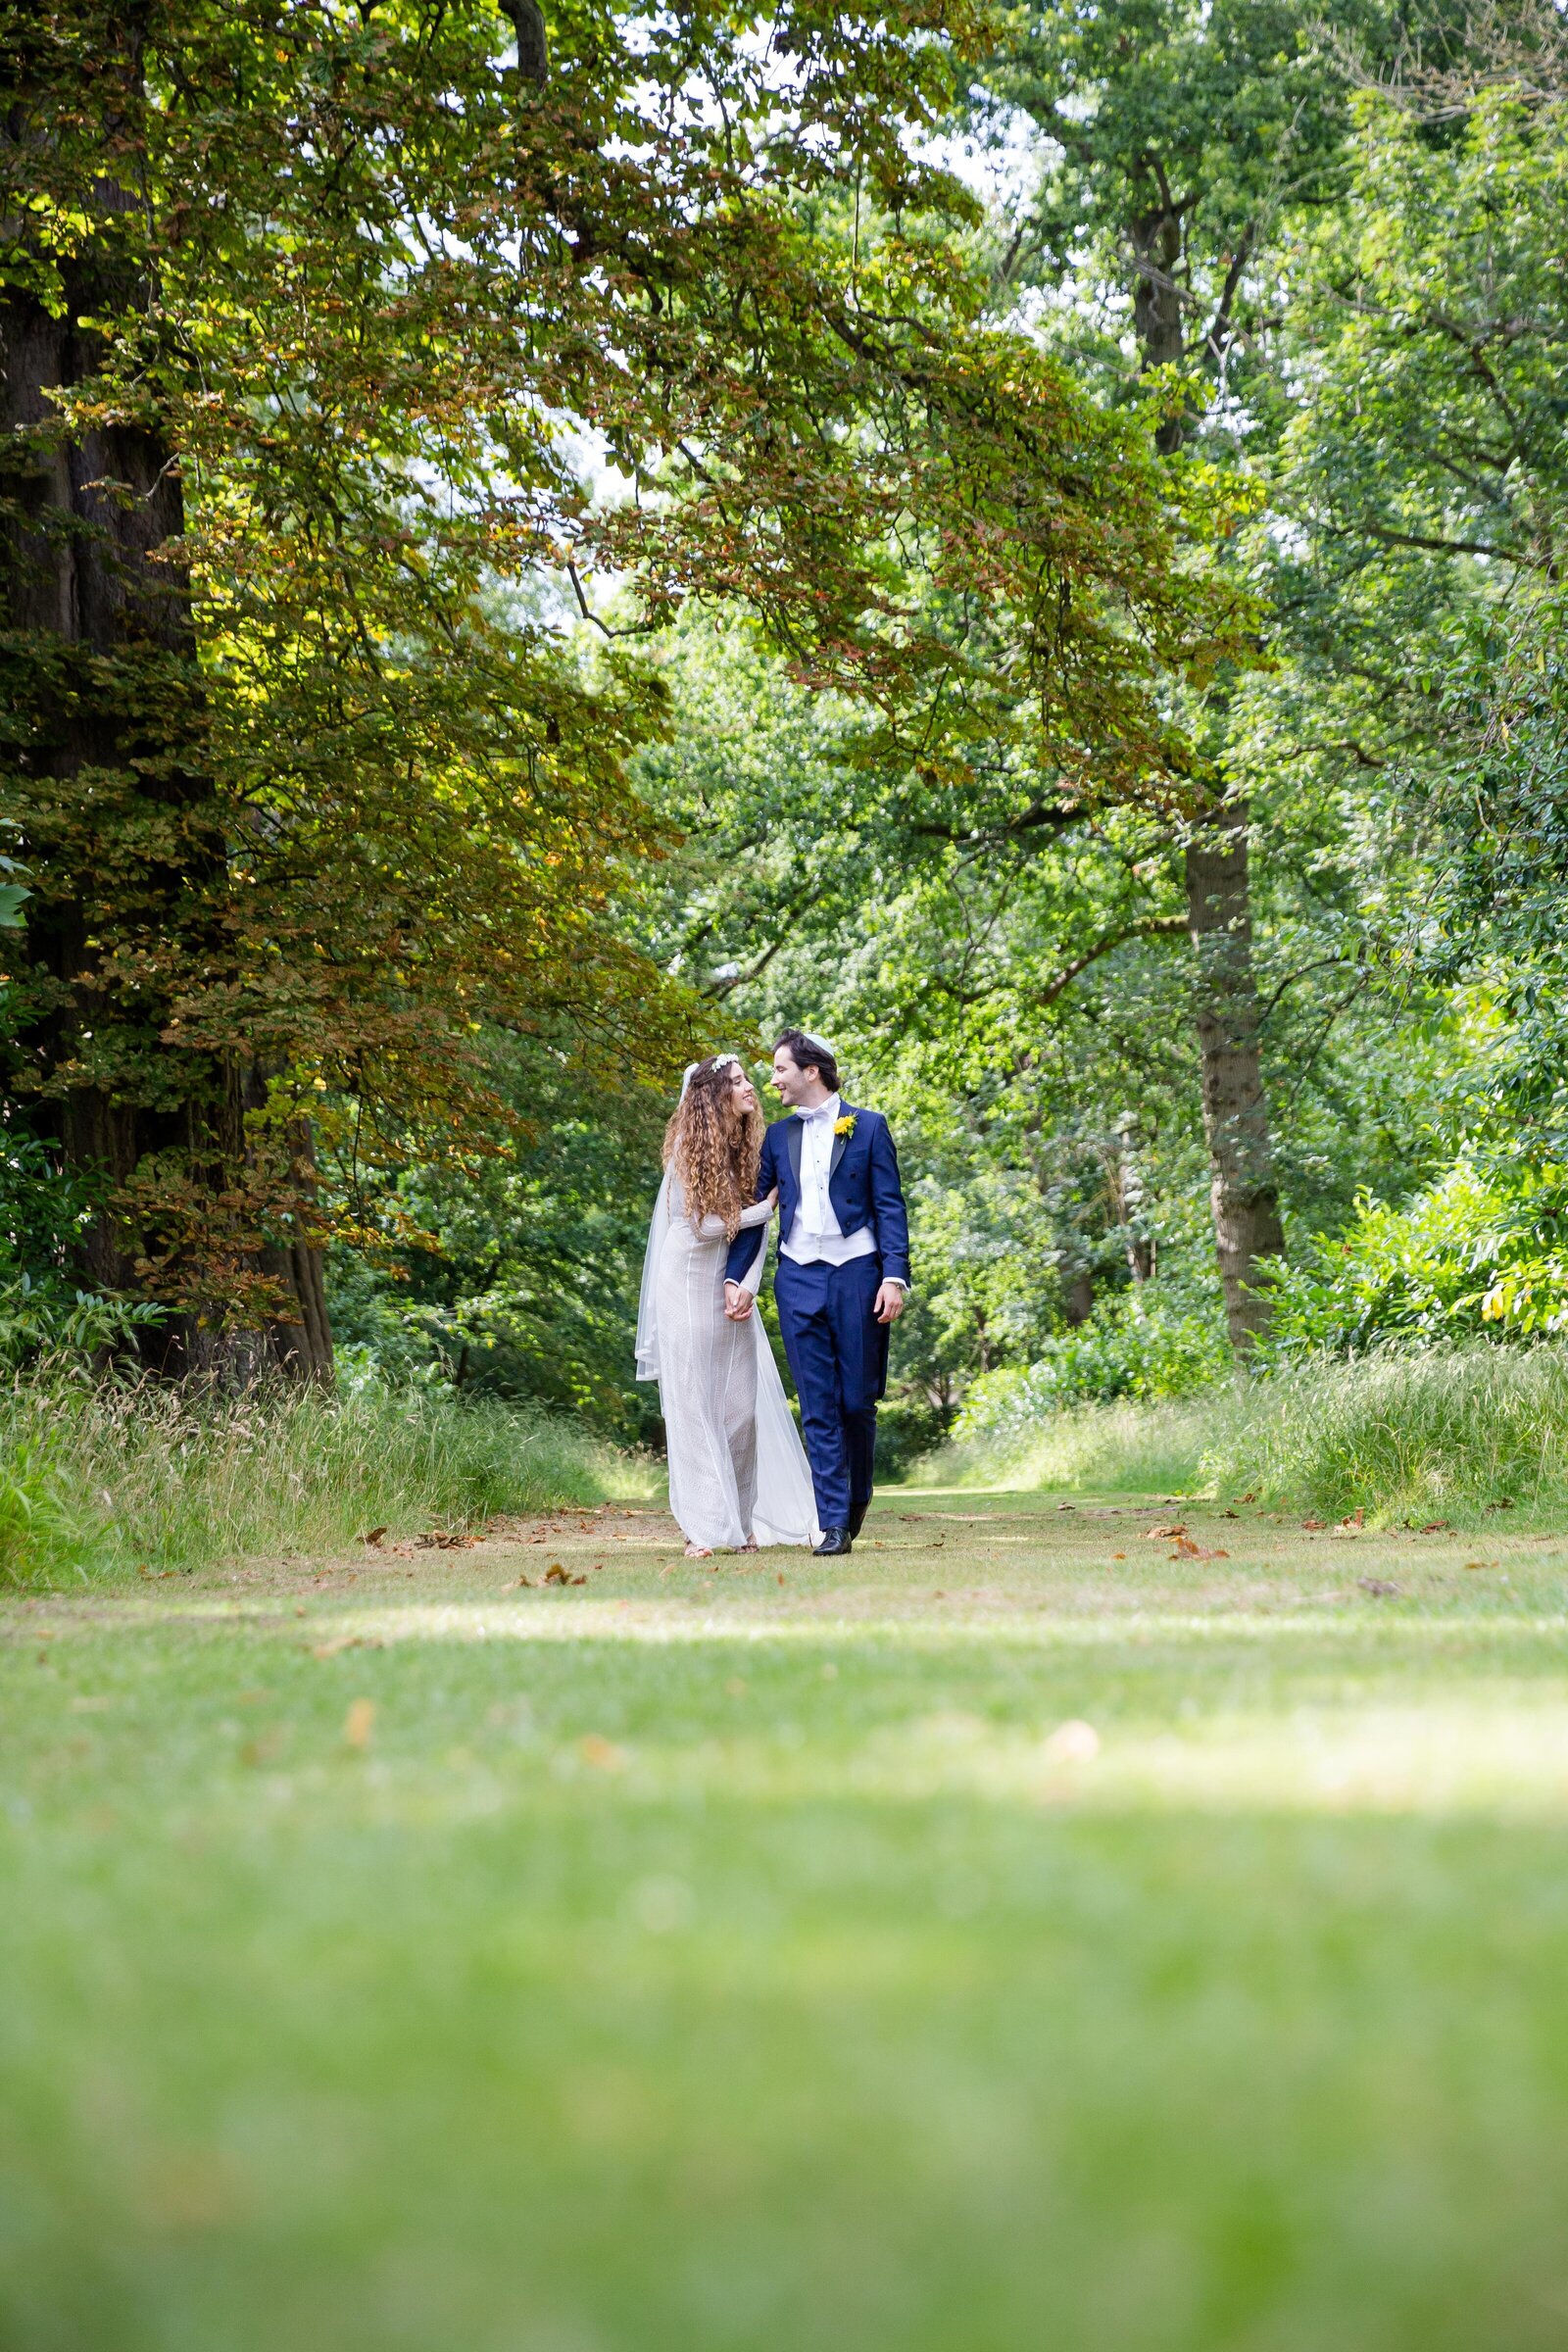 The Bride and Groom Walking through the woods at Wrest Park